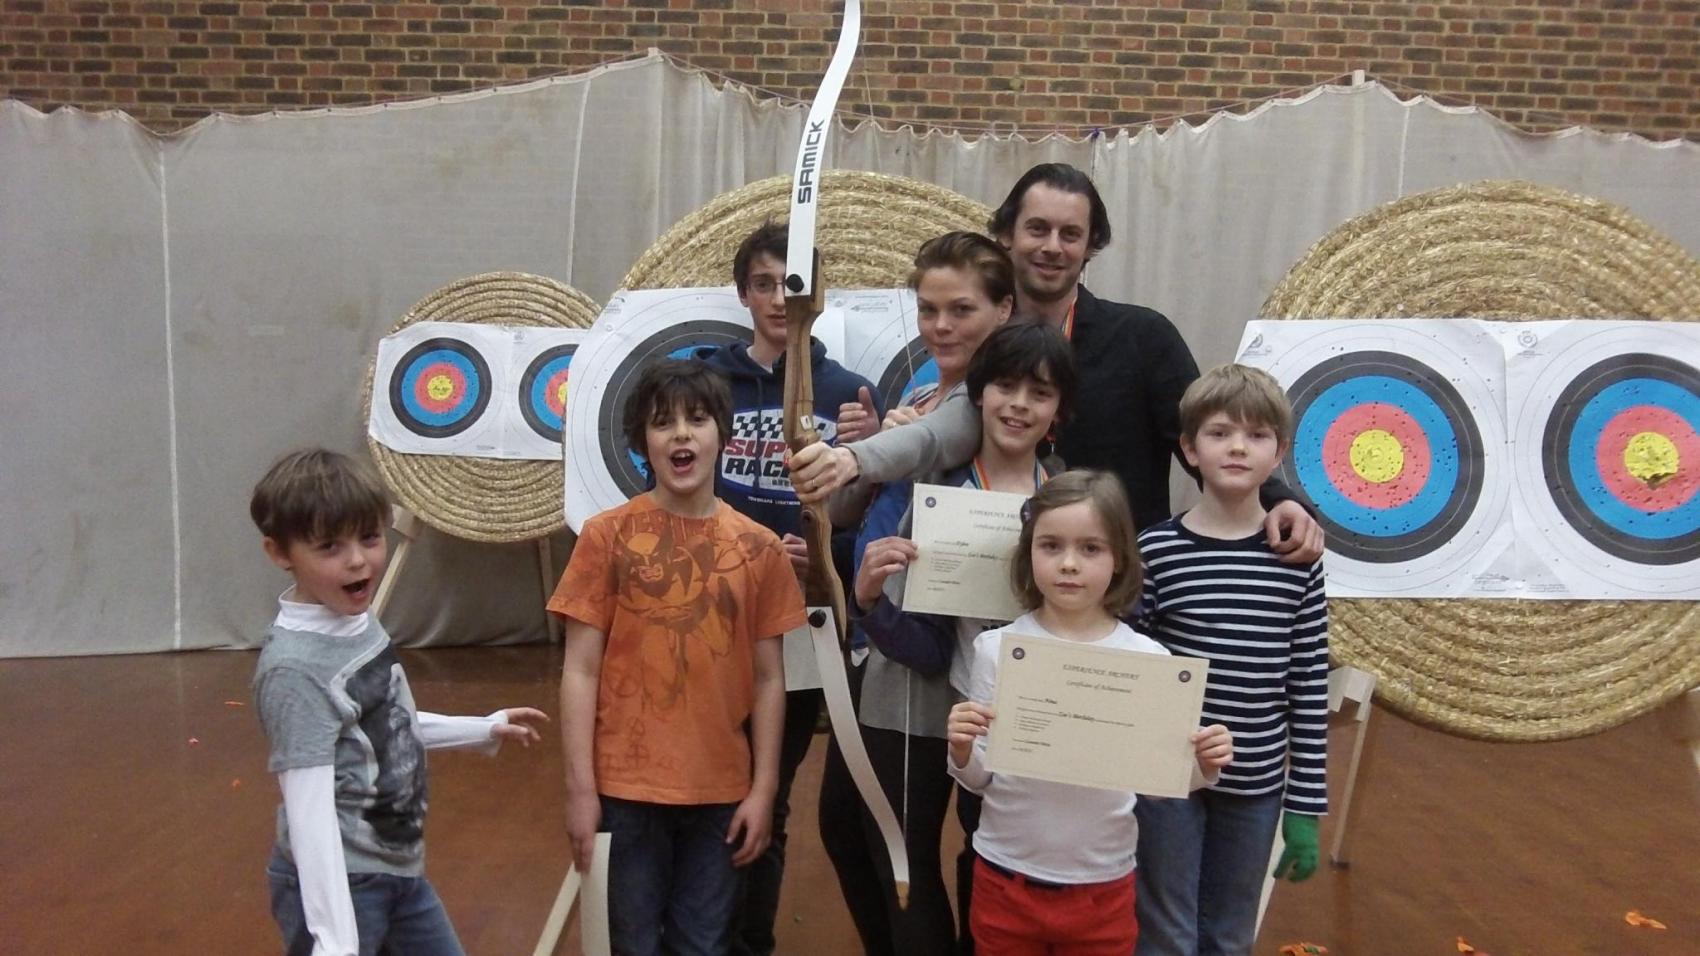 Children and Family Archery Club - Experience Archery